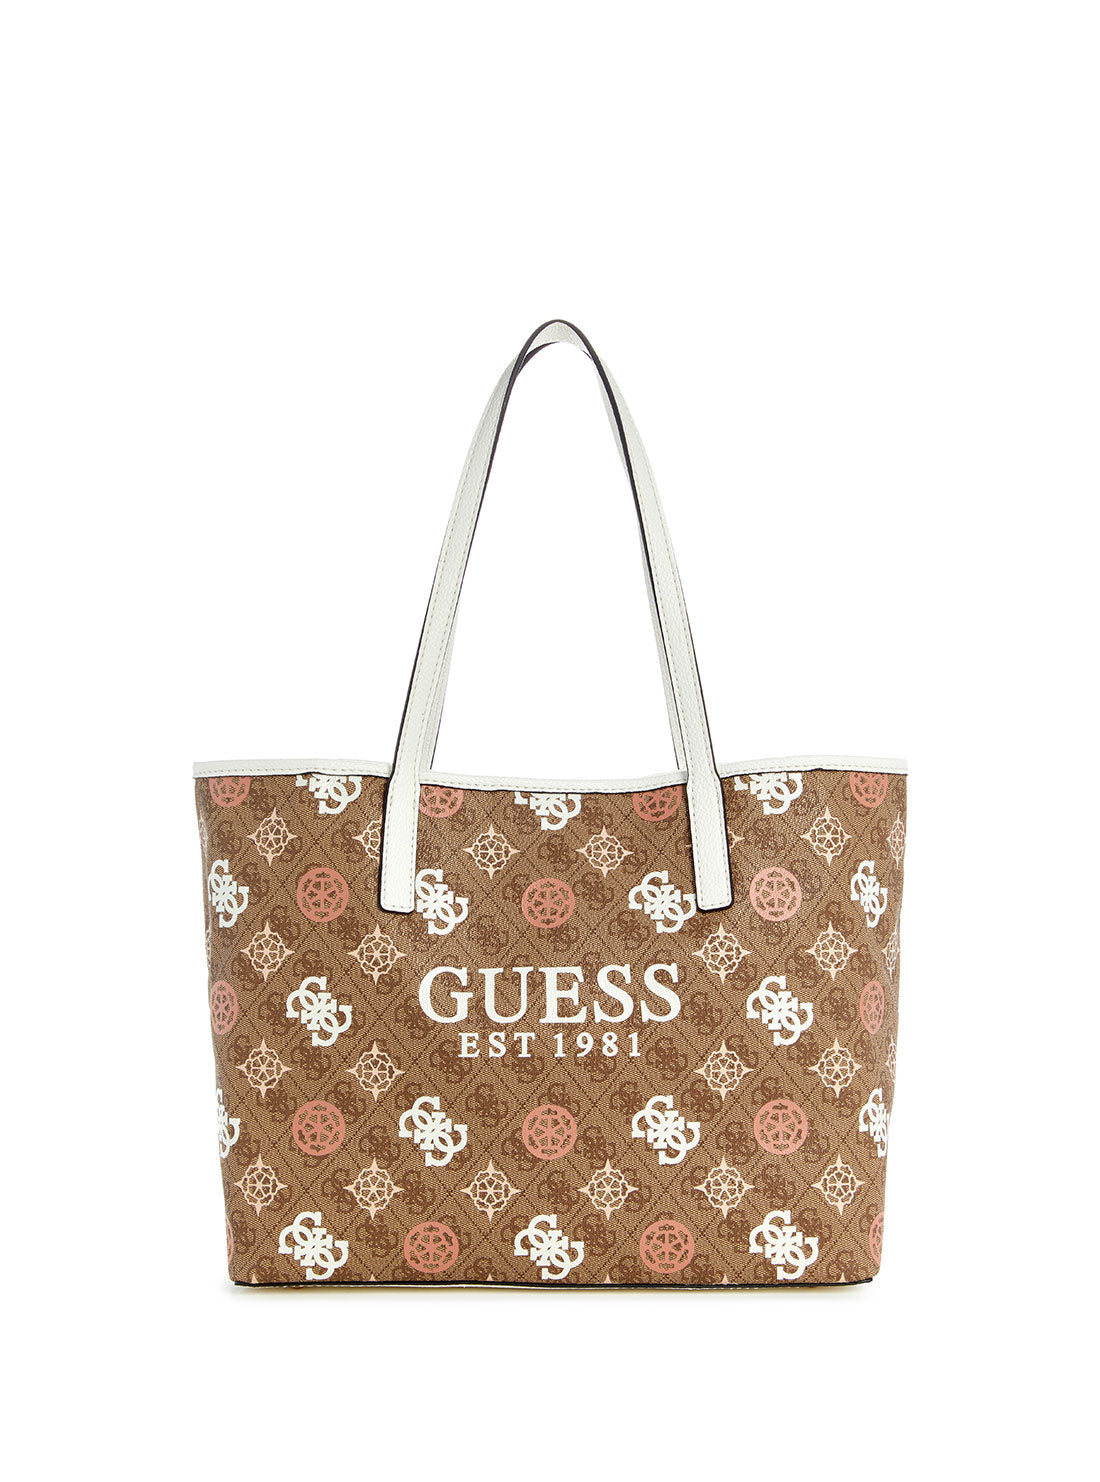 GUESS Beige Tan Logo Vikky 2 in 1 Tote Bag front view